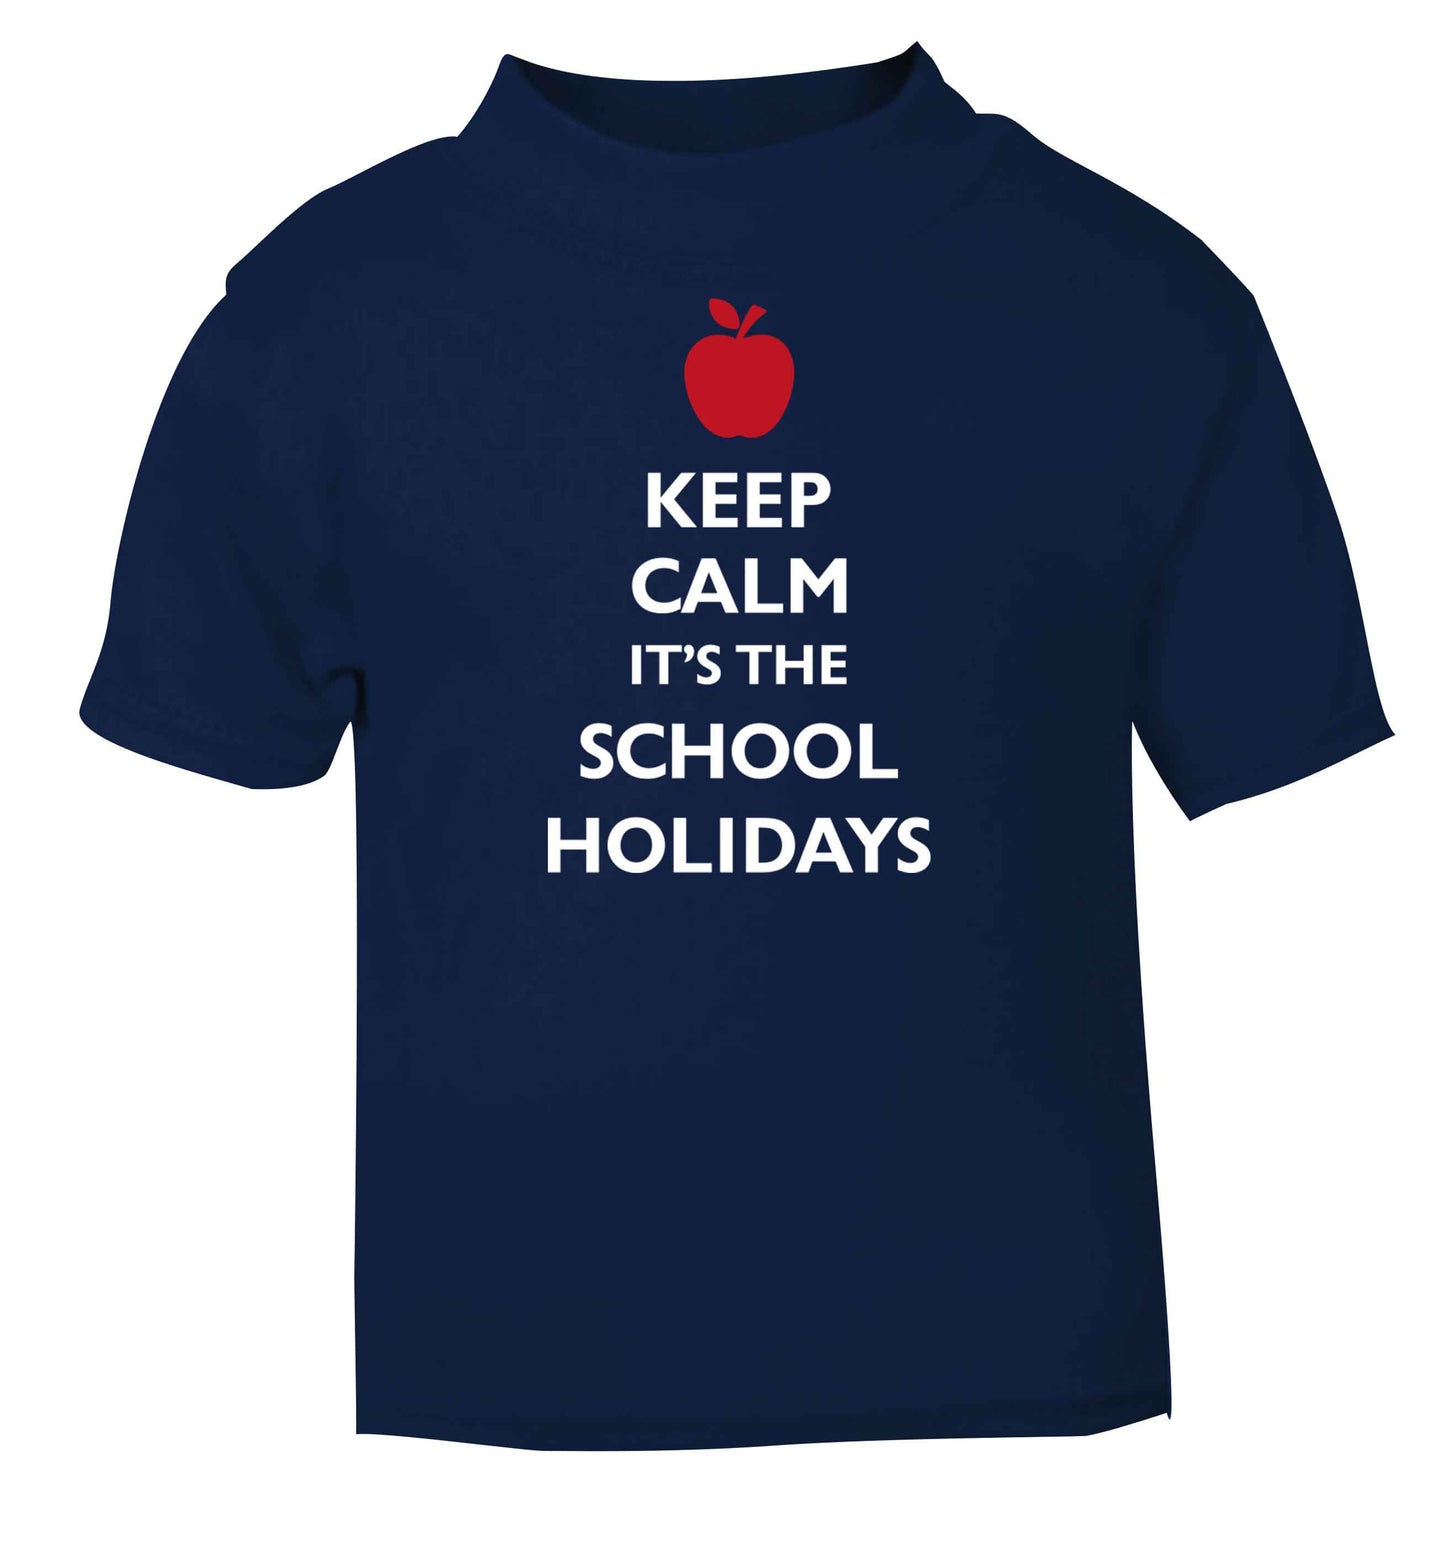 Keep calm it's the school holidays navy baby toddler Tshirt 2 Years